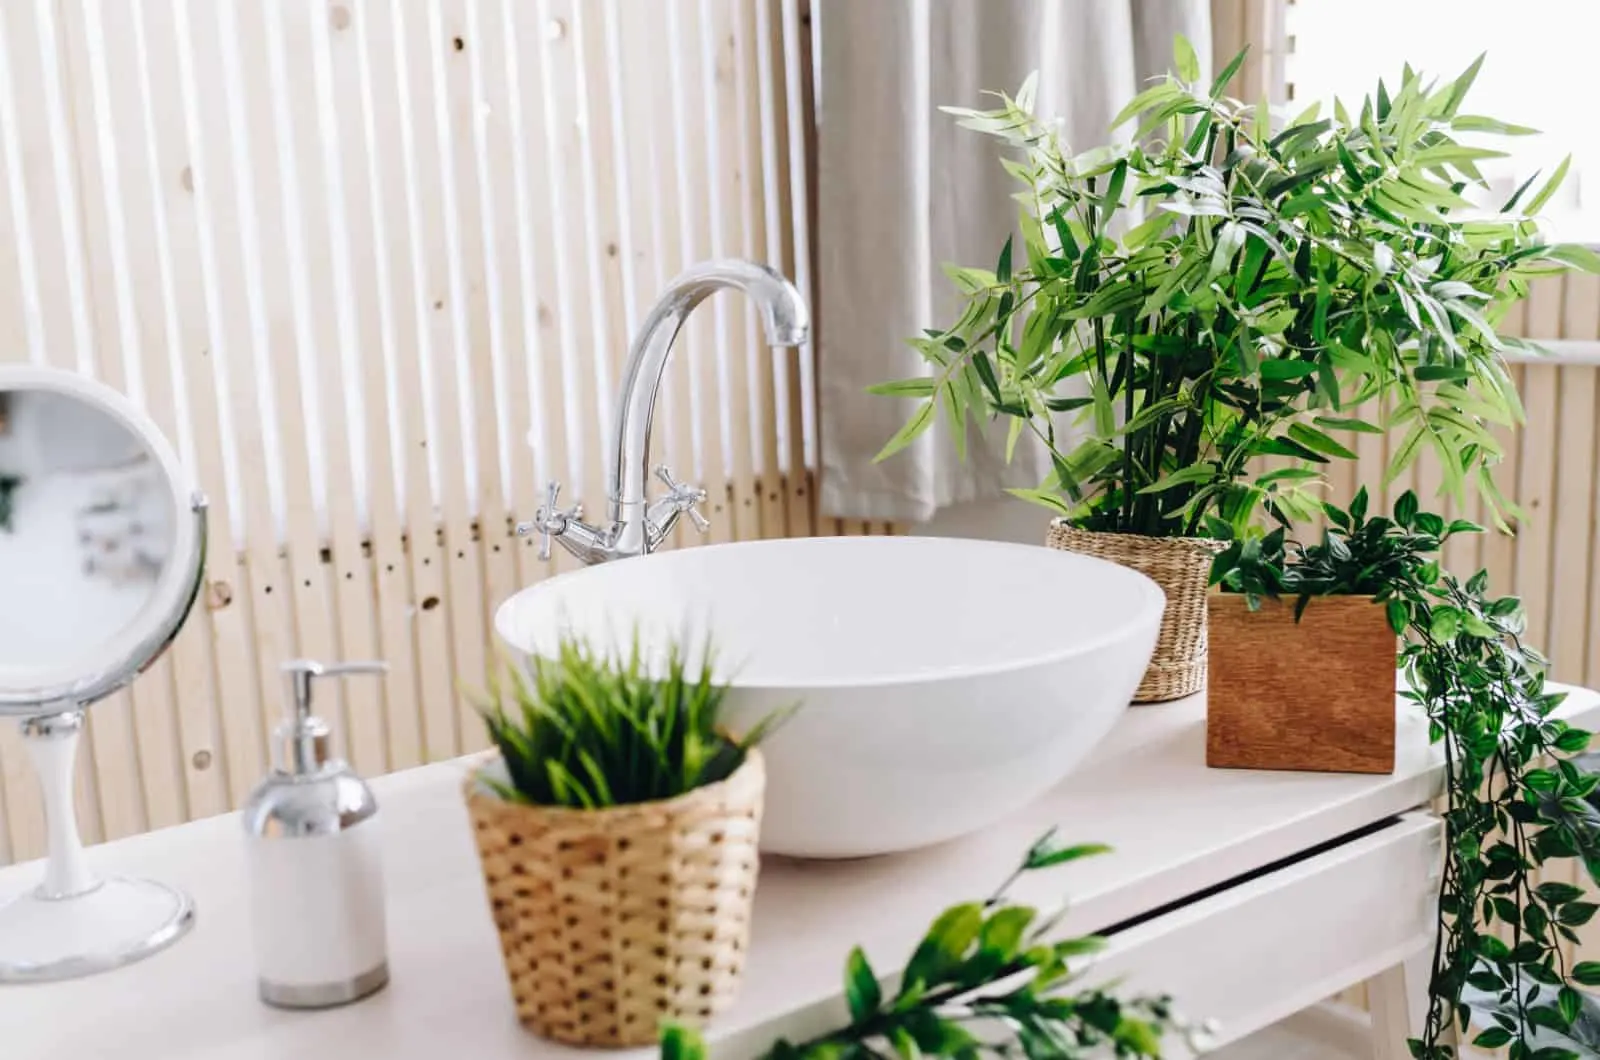 Bathroom Plants That Absorb Moisture (No More Steamy Mirrors!)